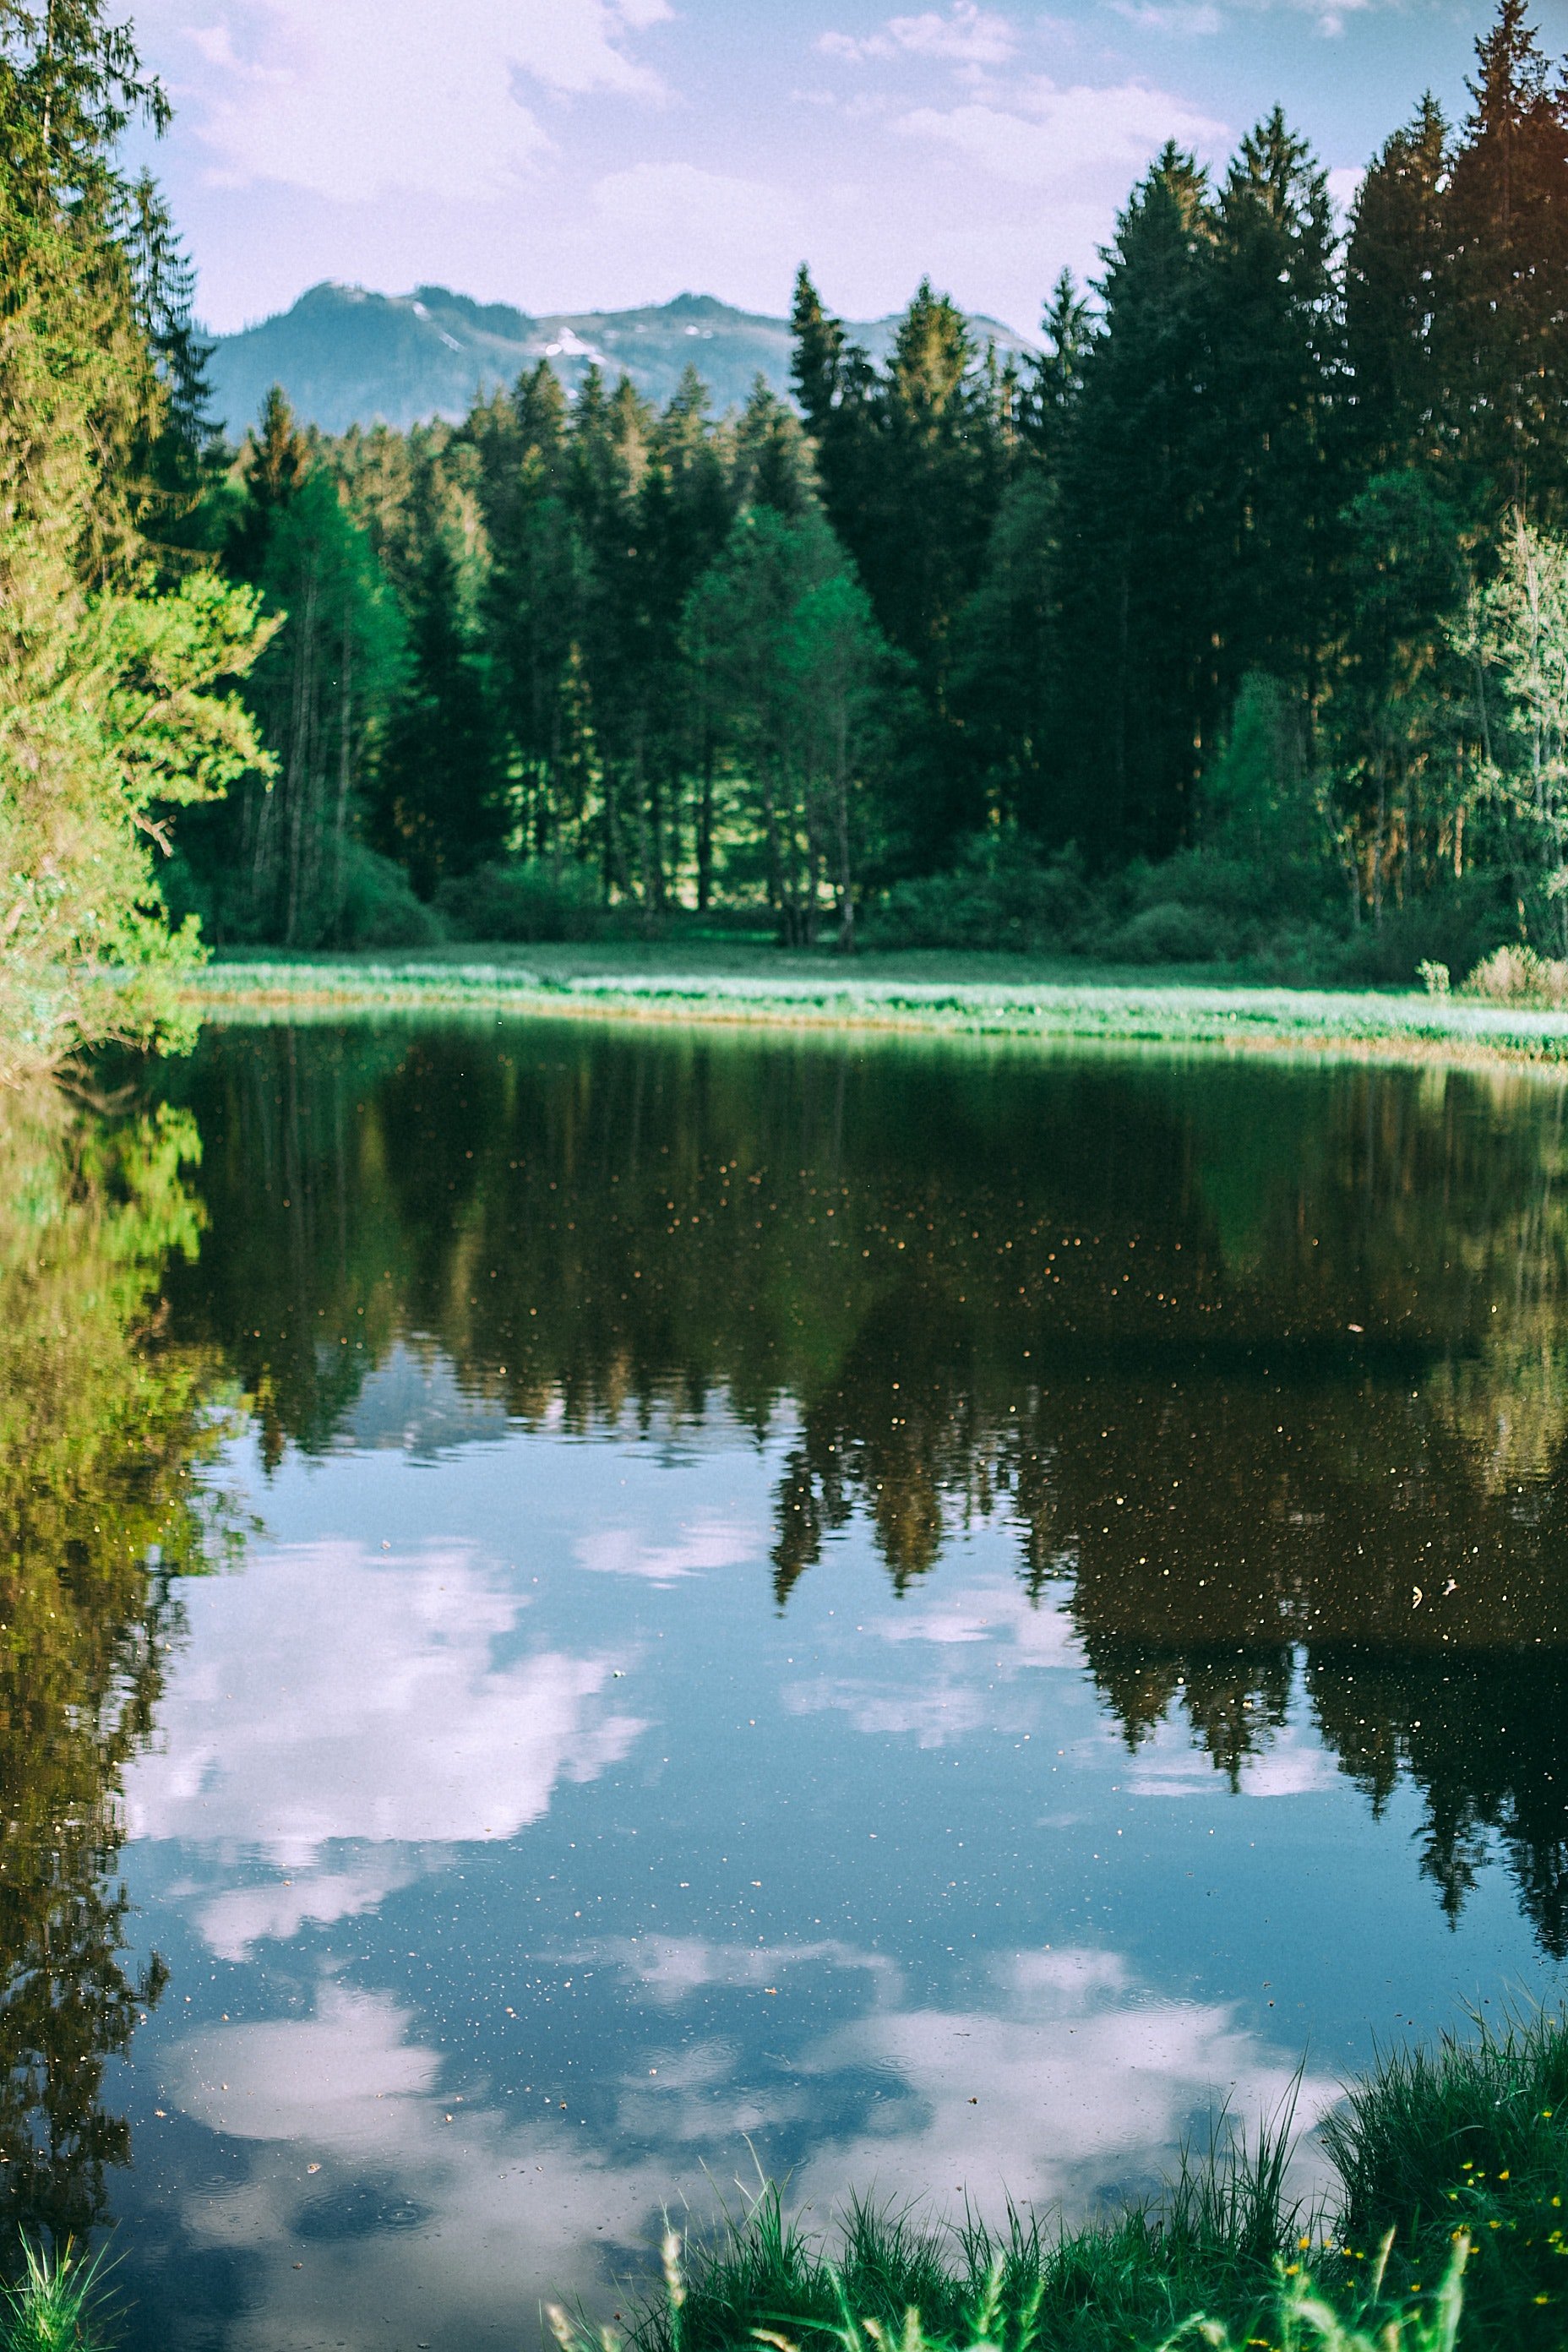 Pictured - A pond in the green forest | Source: Pexels 